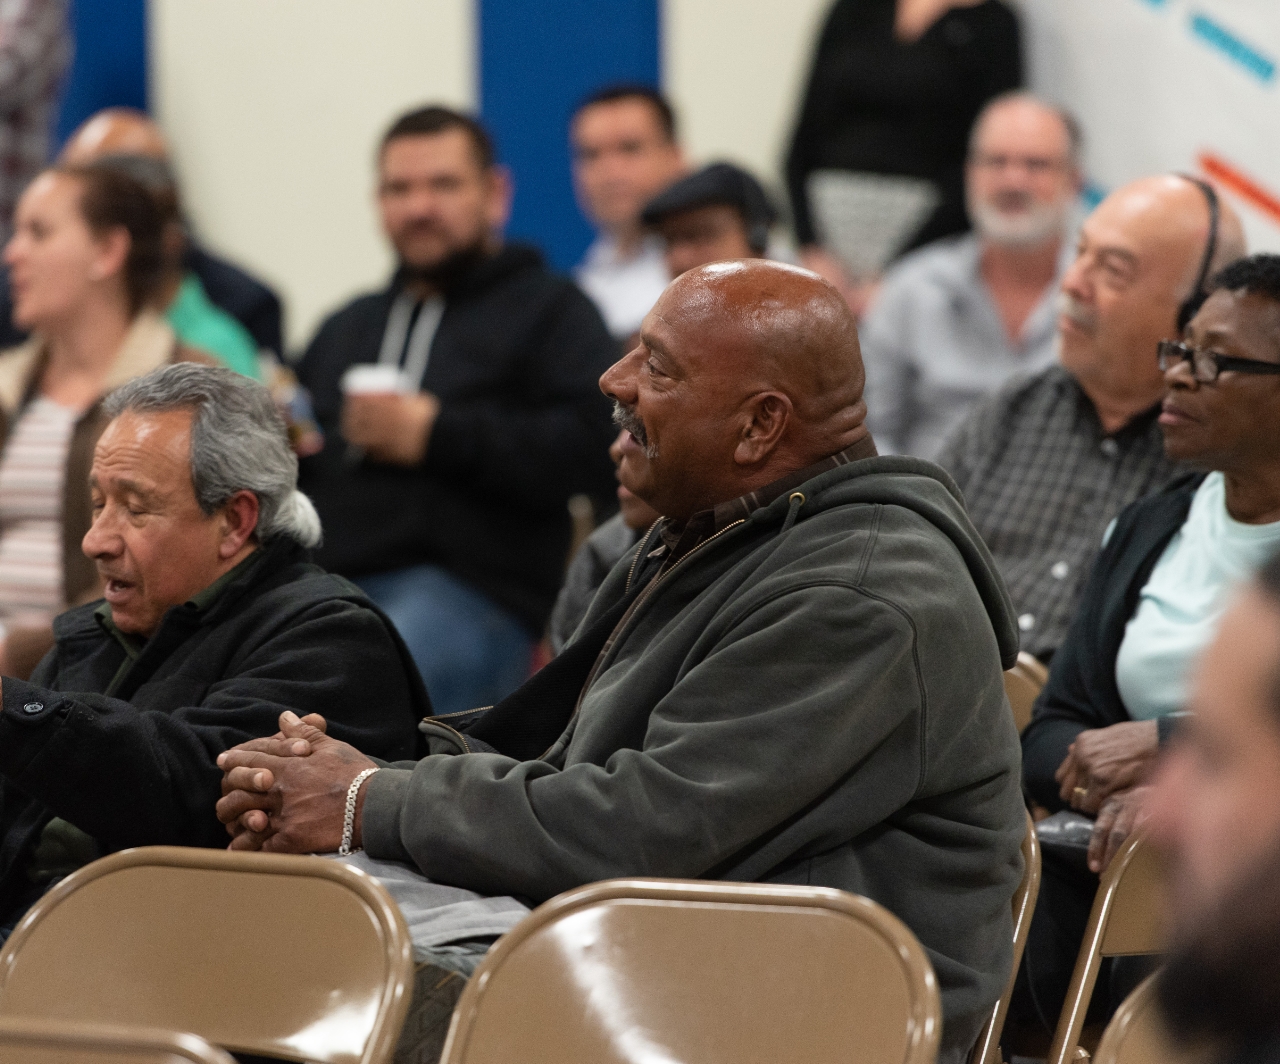 A group of people of different races and ethnicities attending a community meeting